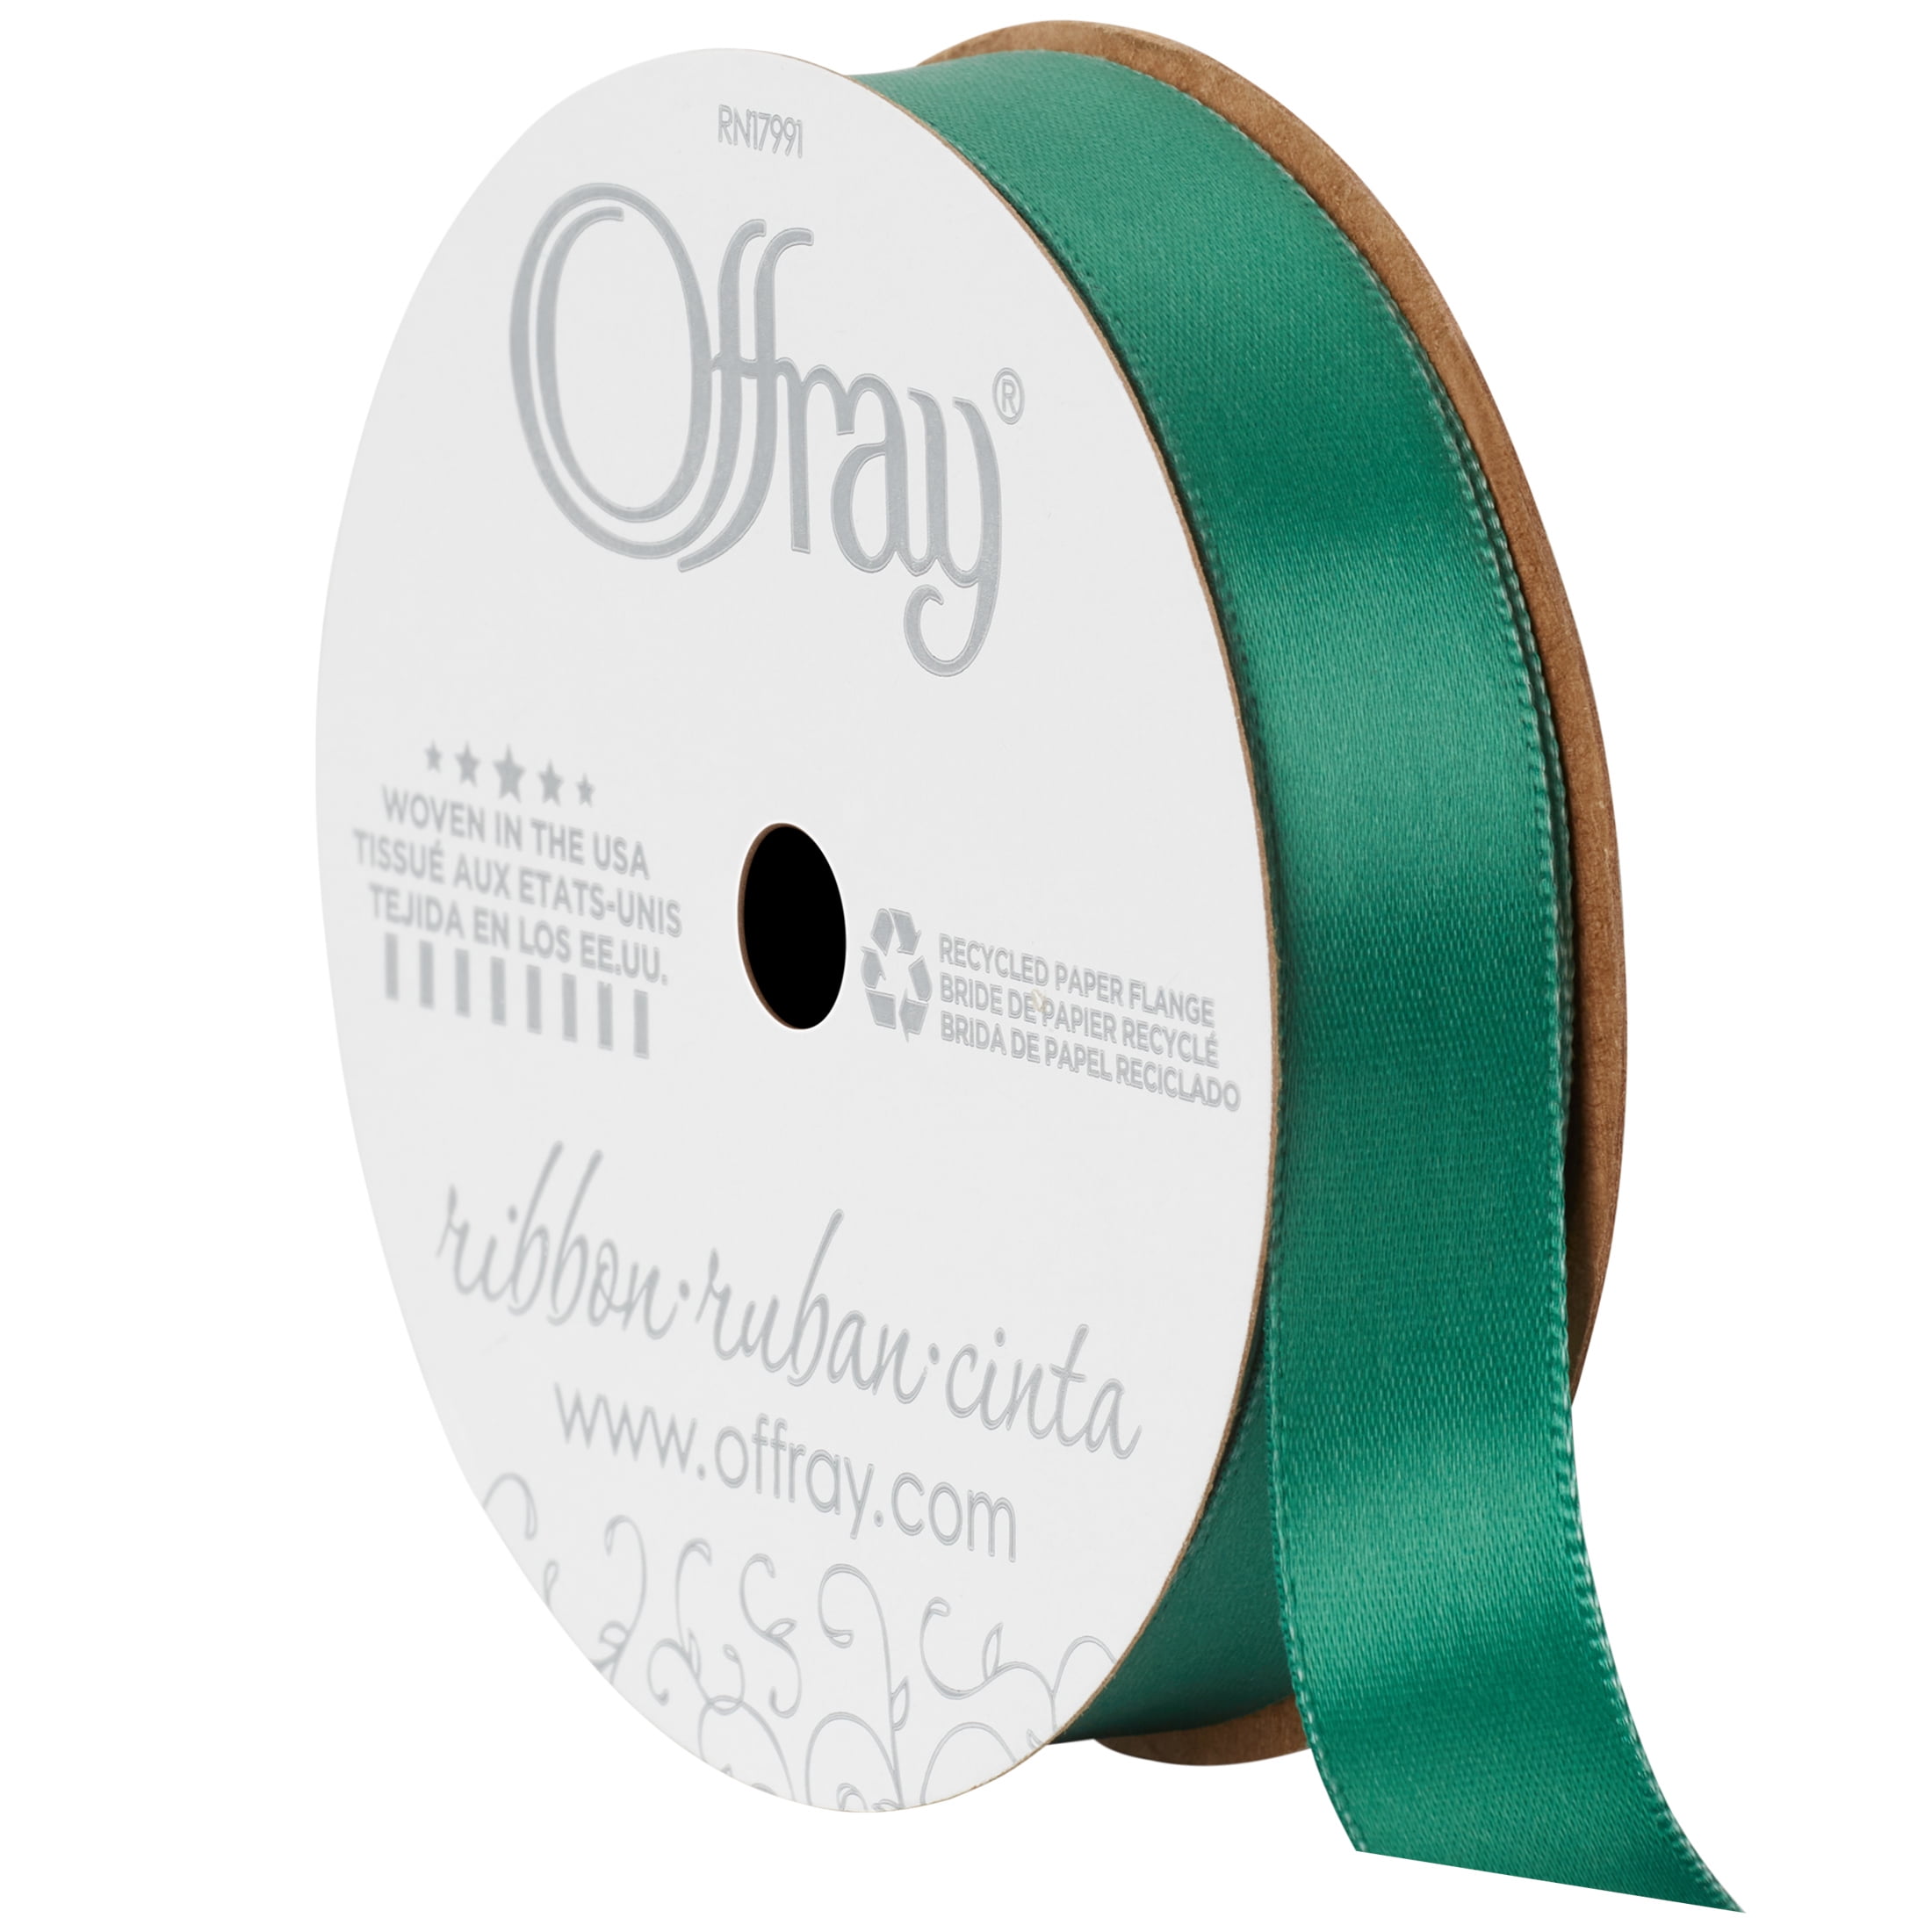 The History of the Mint Green Ribbon